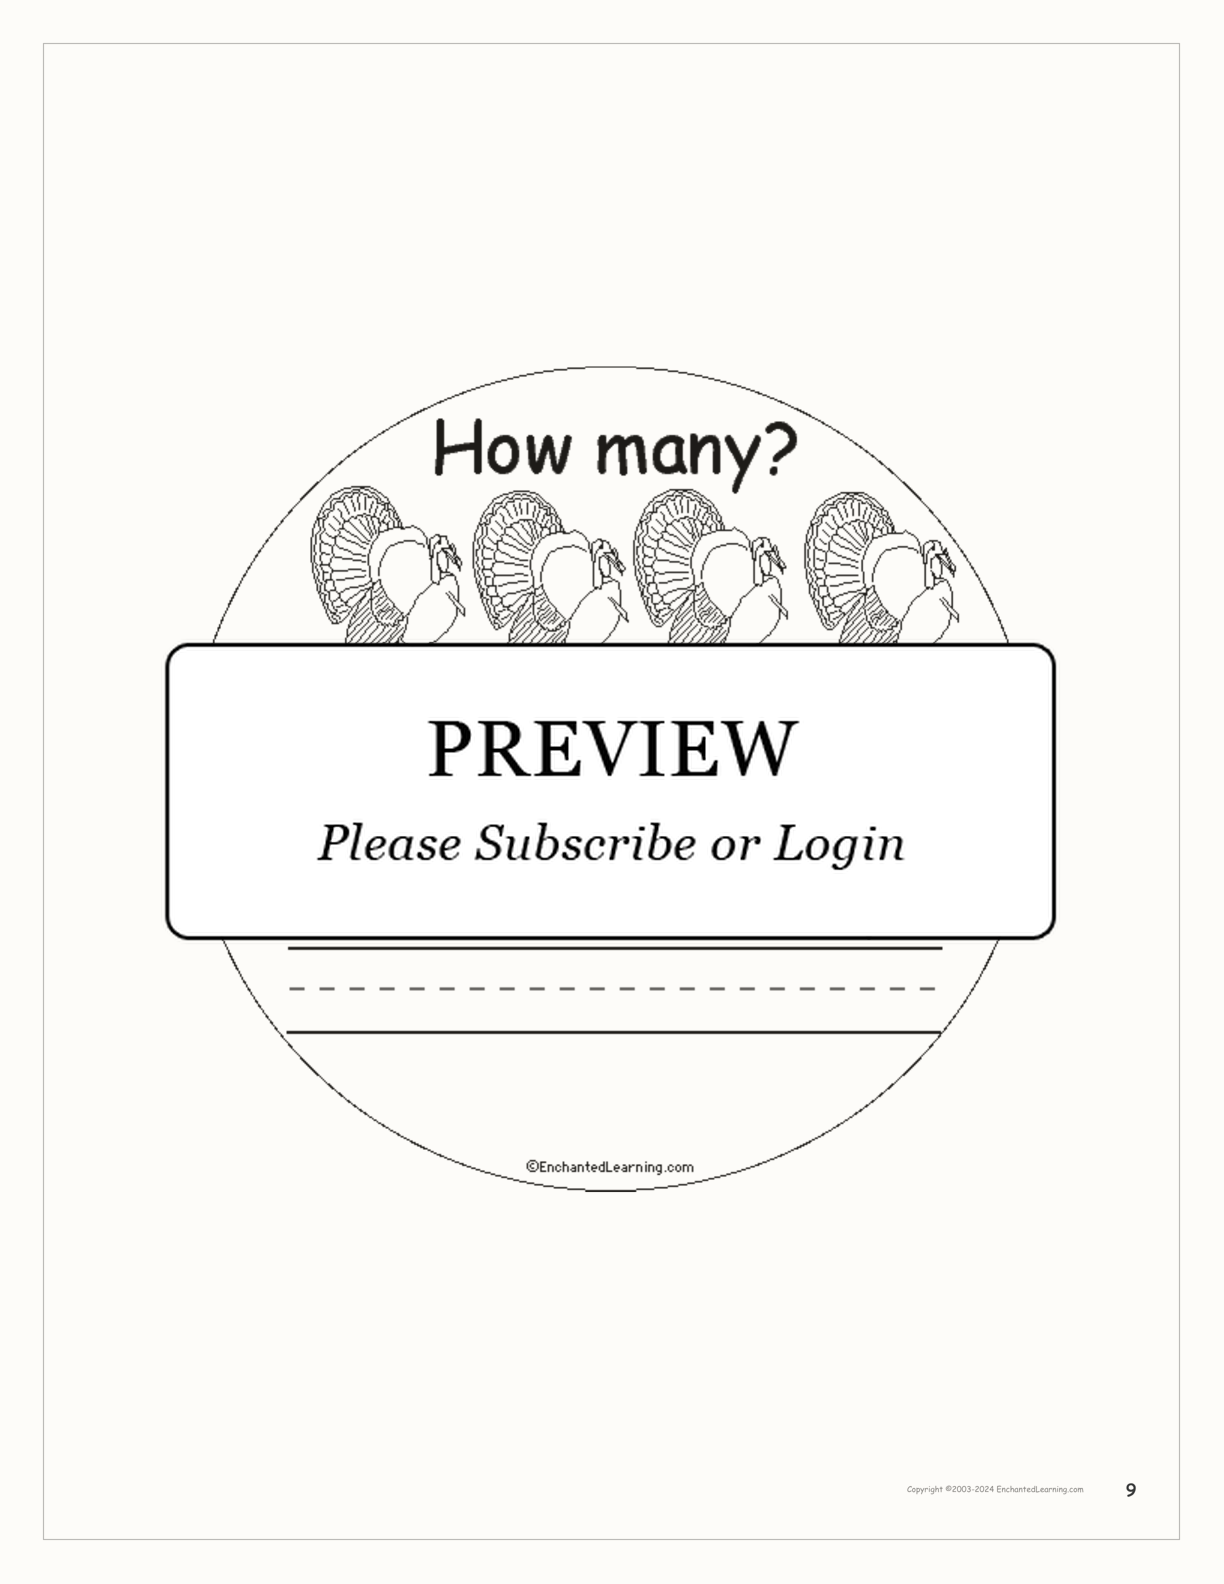 How Many Turkeys? interactive printout page 9